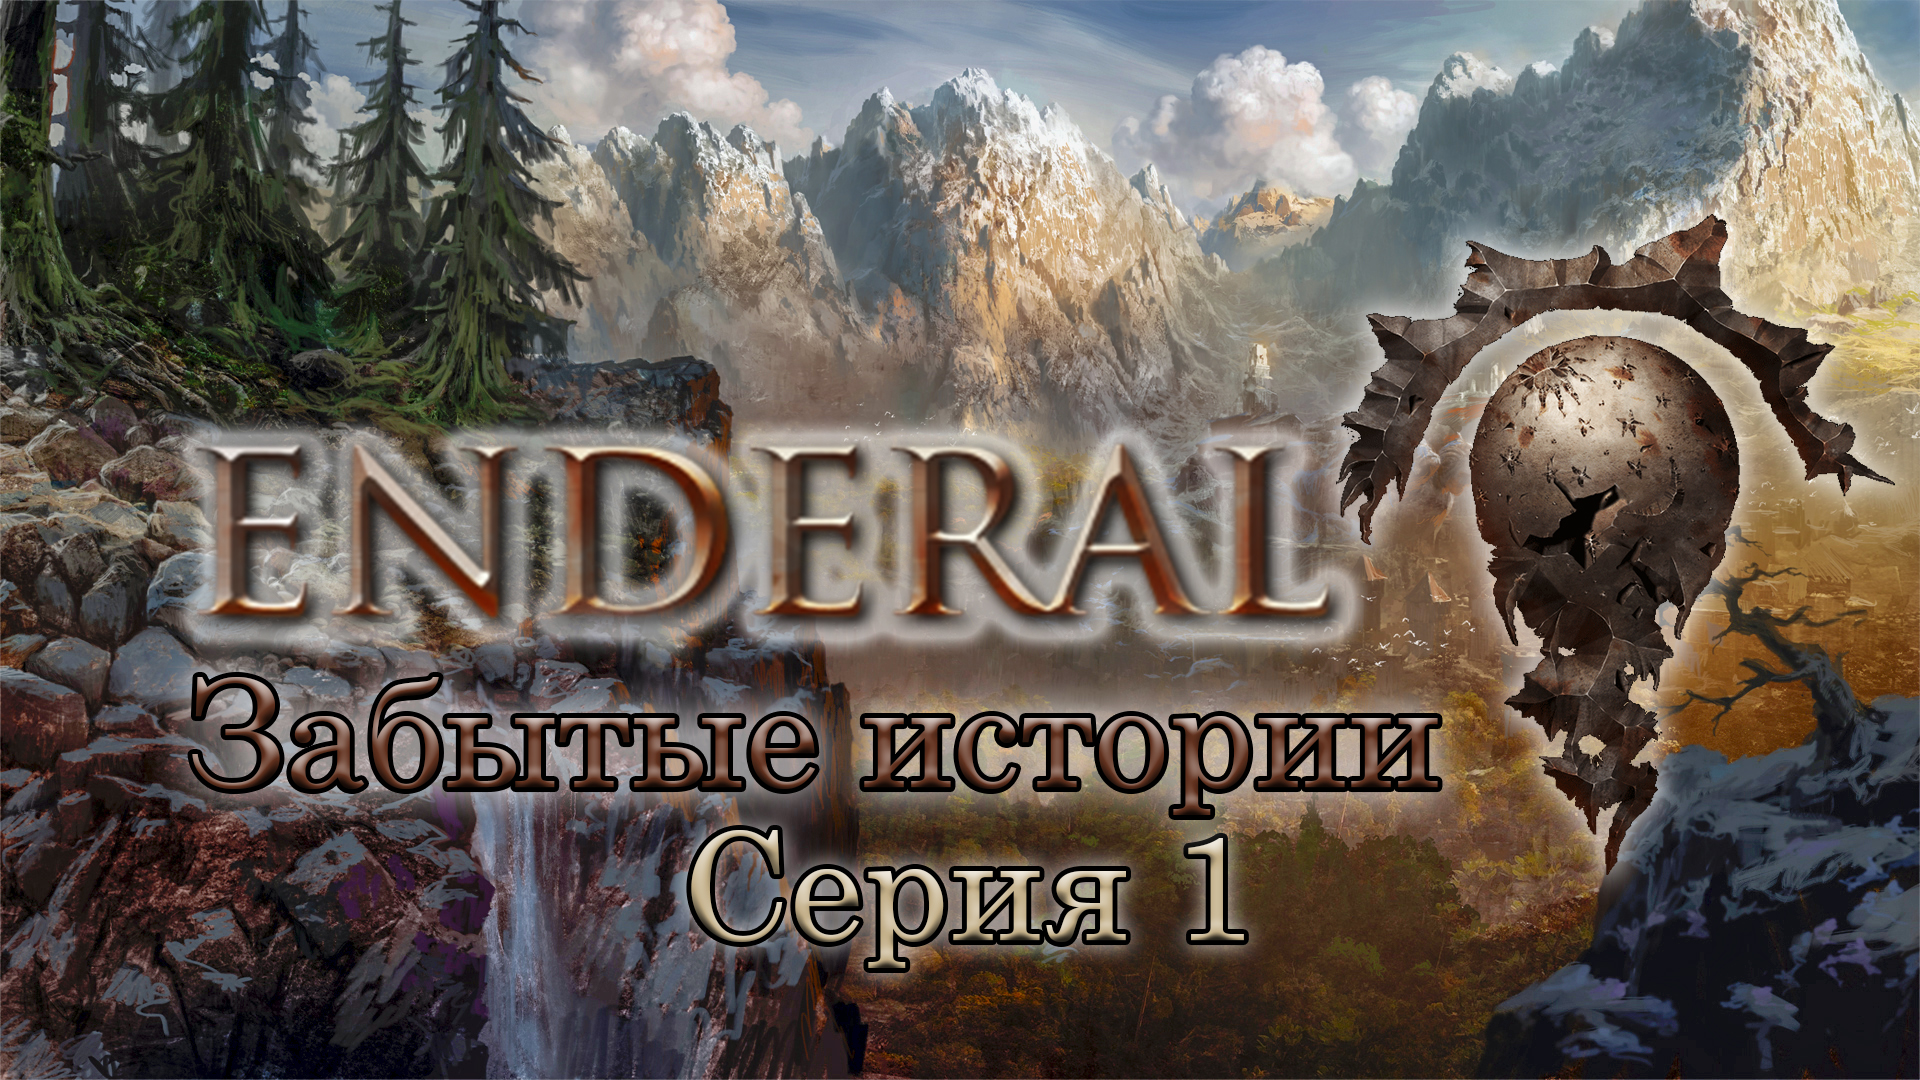 Enderal steam directory not found фото 39